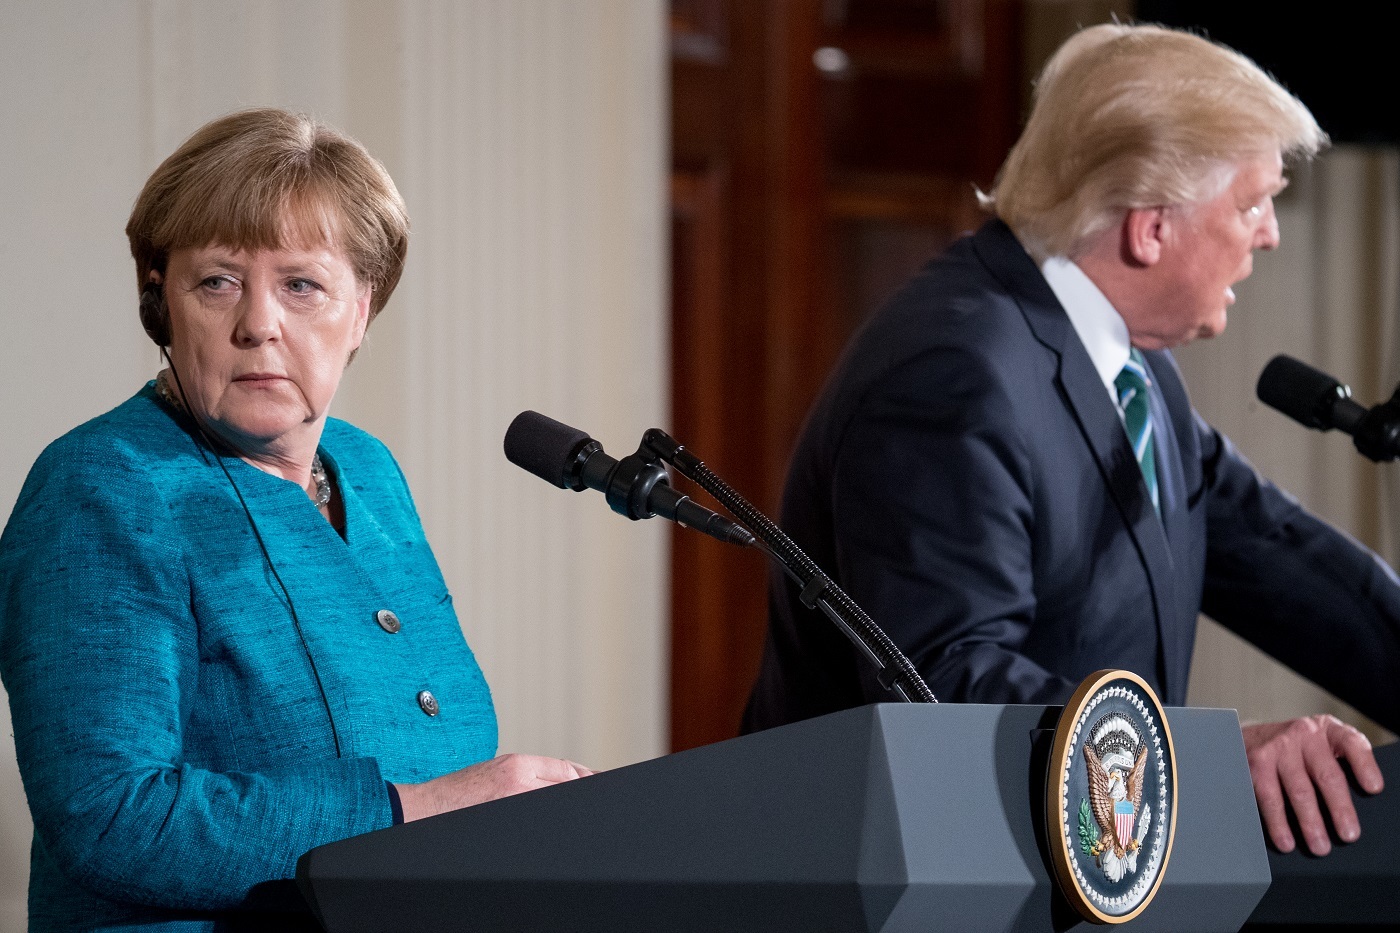 President Donald Trump and German Chancellor Angela Merkel participate in a joint news conference in the East Room of the White House in Washington, Friday, March 17, 2017. (AP Photo/Andrew Harnik)